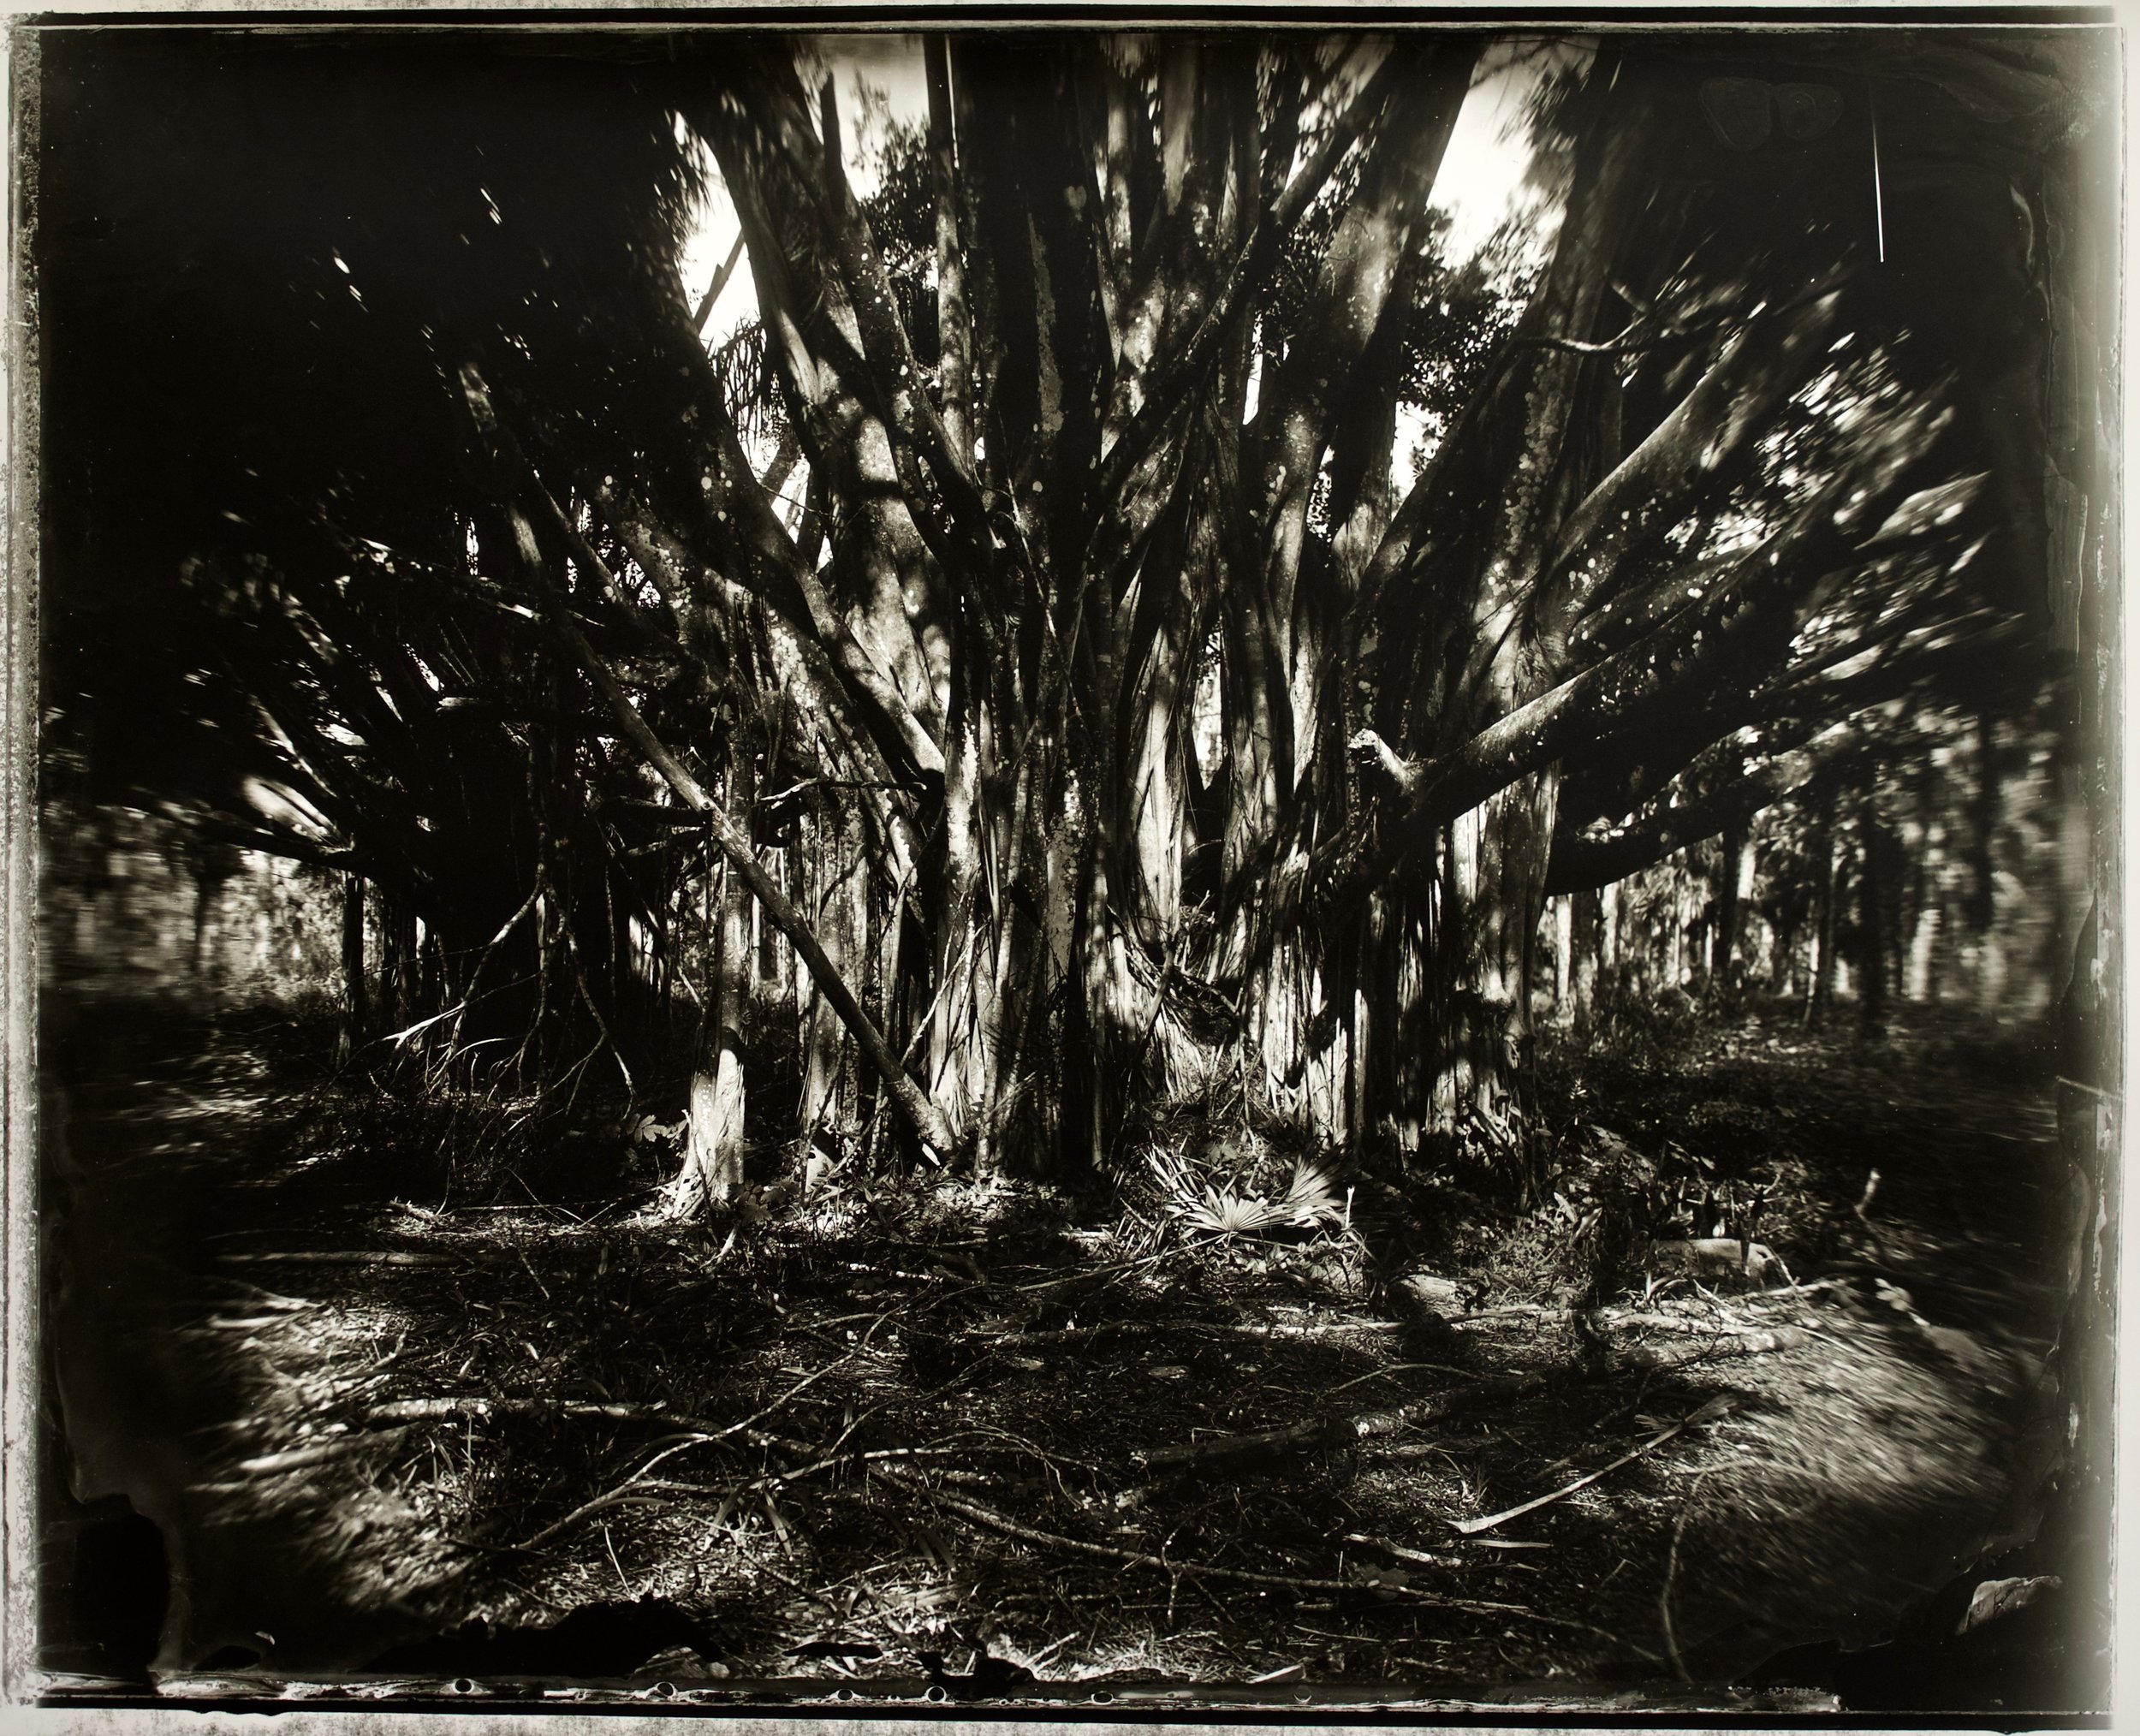 The Sacred and the Mundane 36 in. x 29 in., collodian negative hand printed on Fomatone paper, 2018. #2018-12.jpg